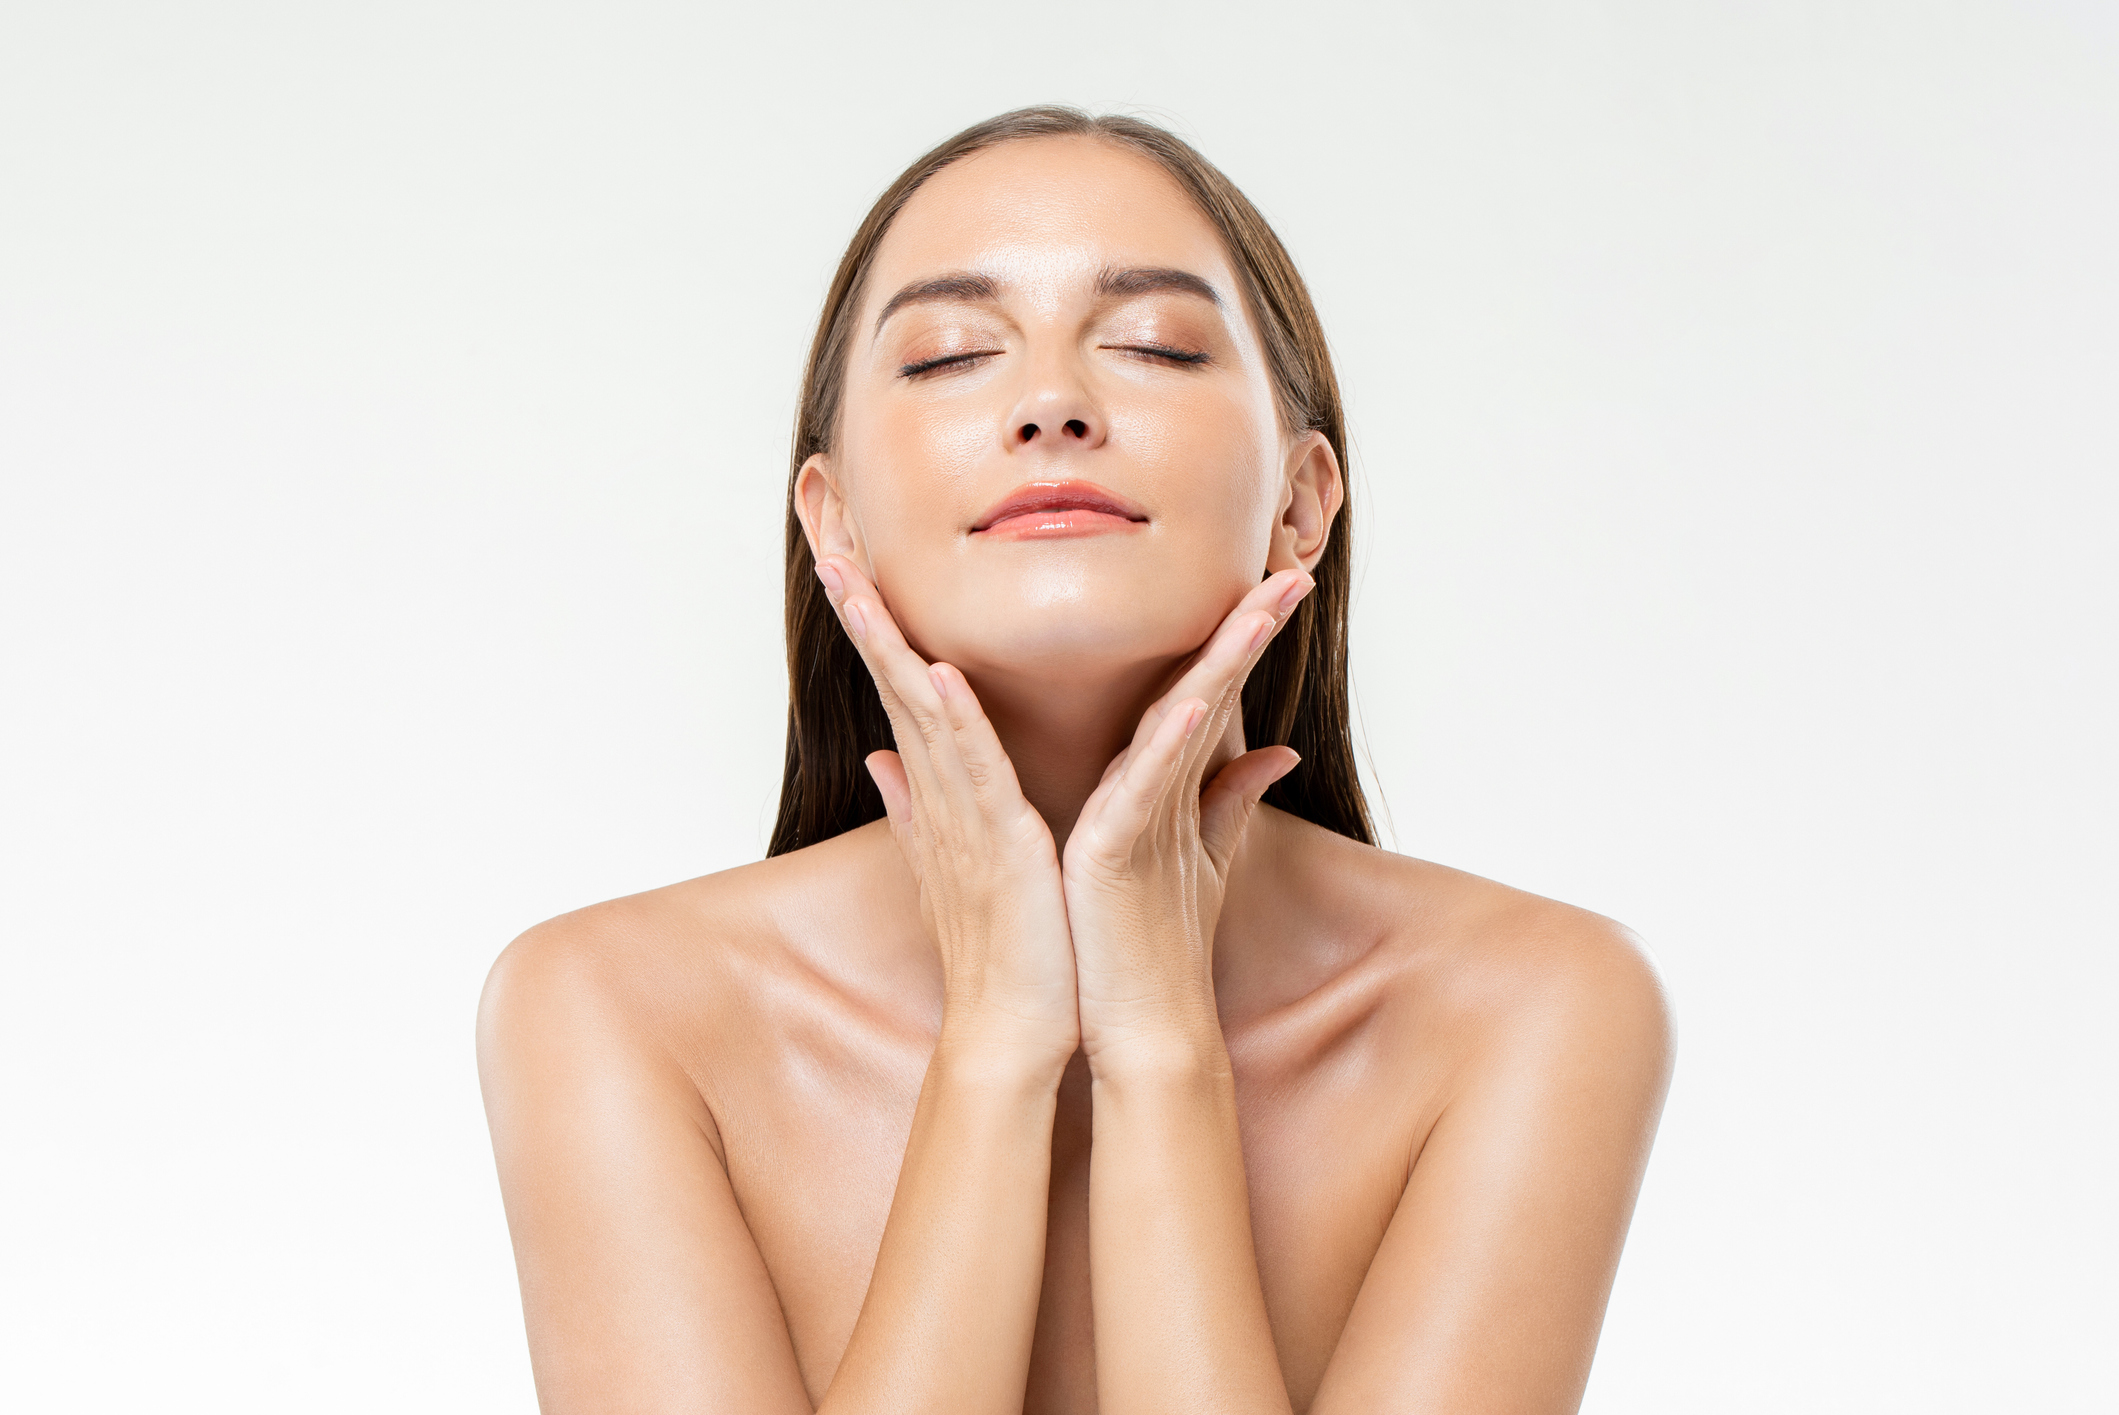 Bloom Facial Plastic Surgery Blog | Tips to Choosing the Right Facelift Surgeon